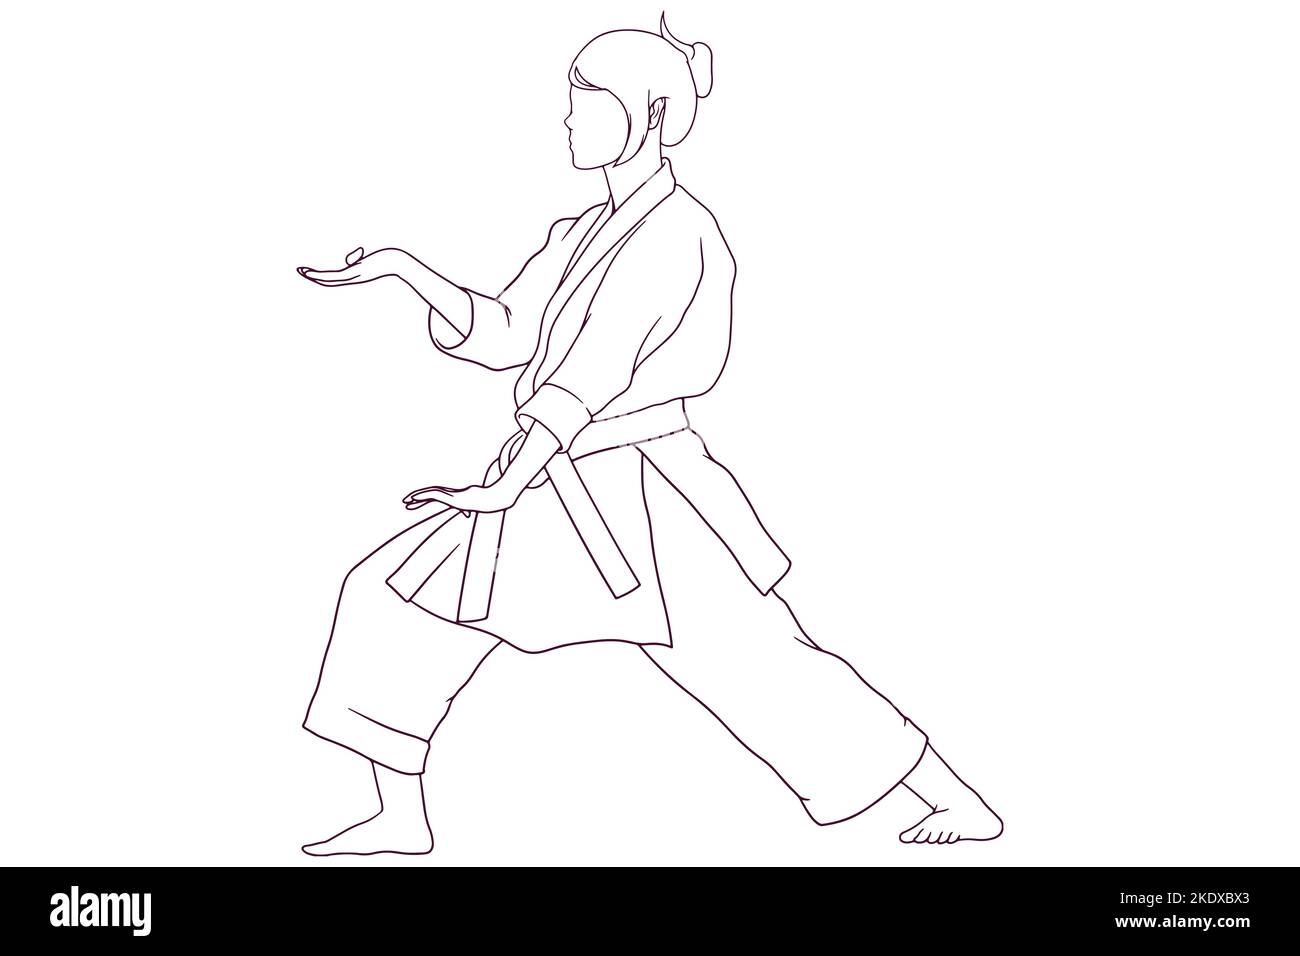 young girl doing karate pose hand drawn style vector illustration Stock Vector